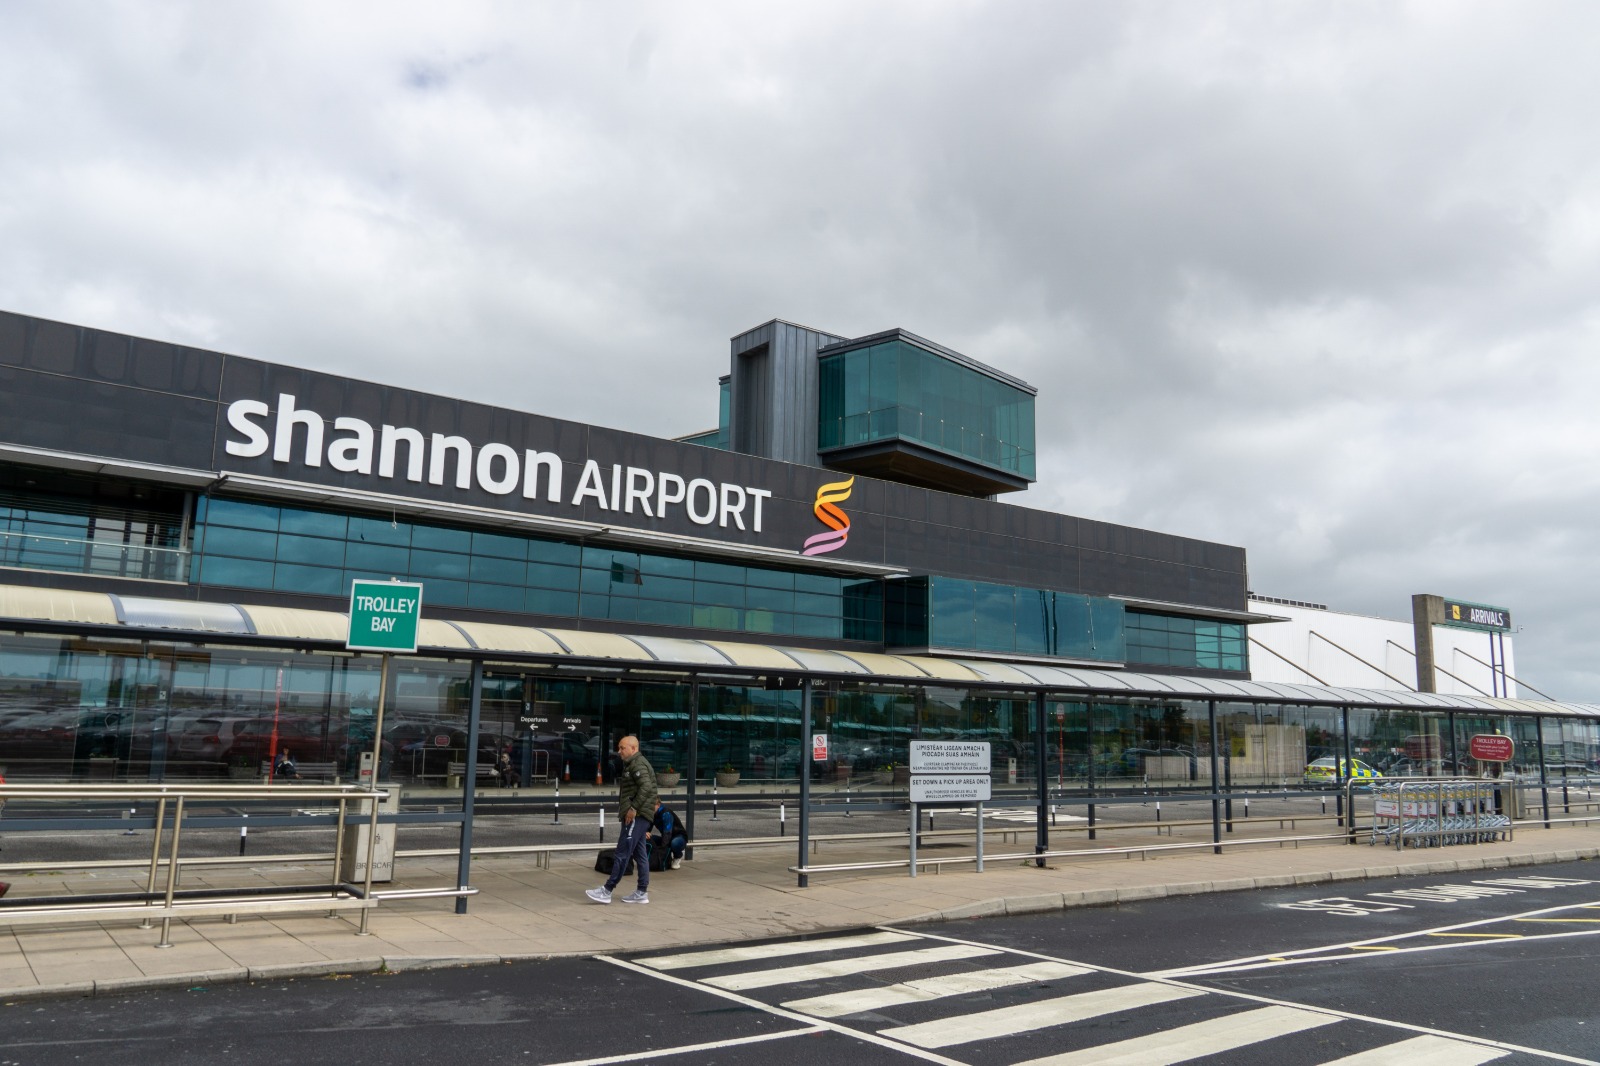 Age Friendly Airports at Shannon and Dublin were officially launched as so at a ceremony officiated by the Minister of State at the Department of Transport.